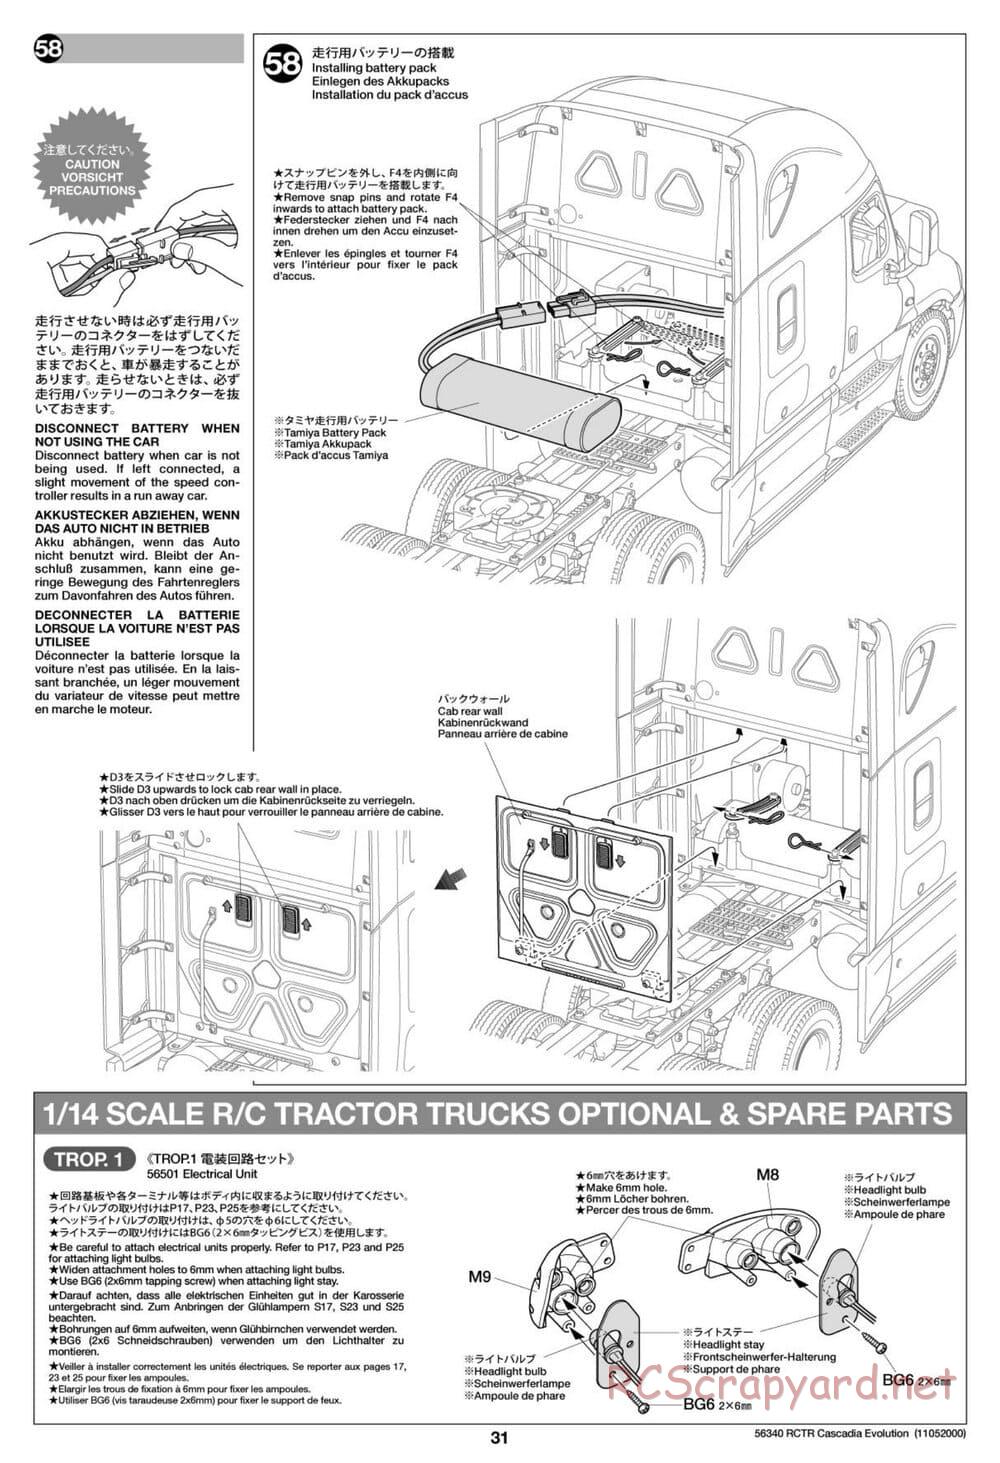 Tamiya - Freightliner Cascadia Evolution Tractor Truck Chassis - Manual - Page 31